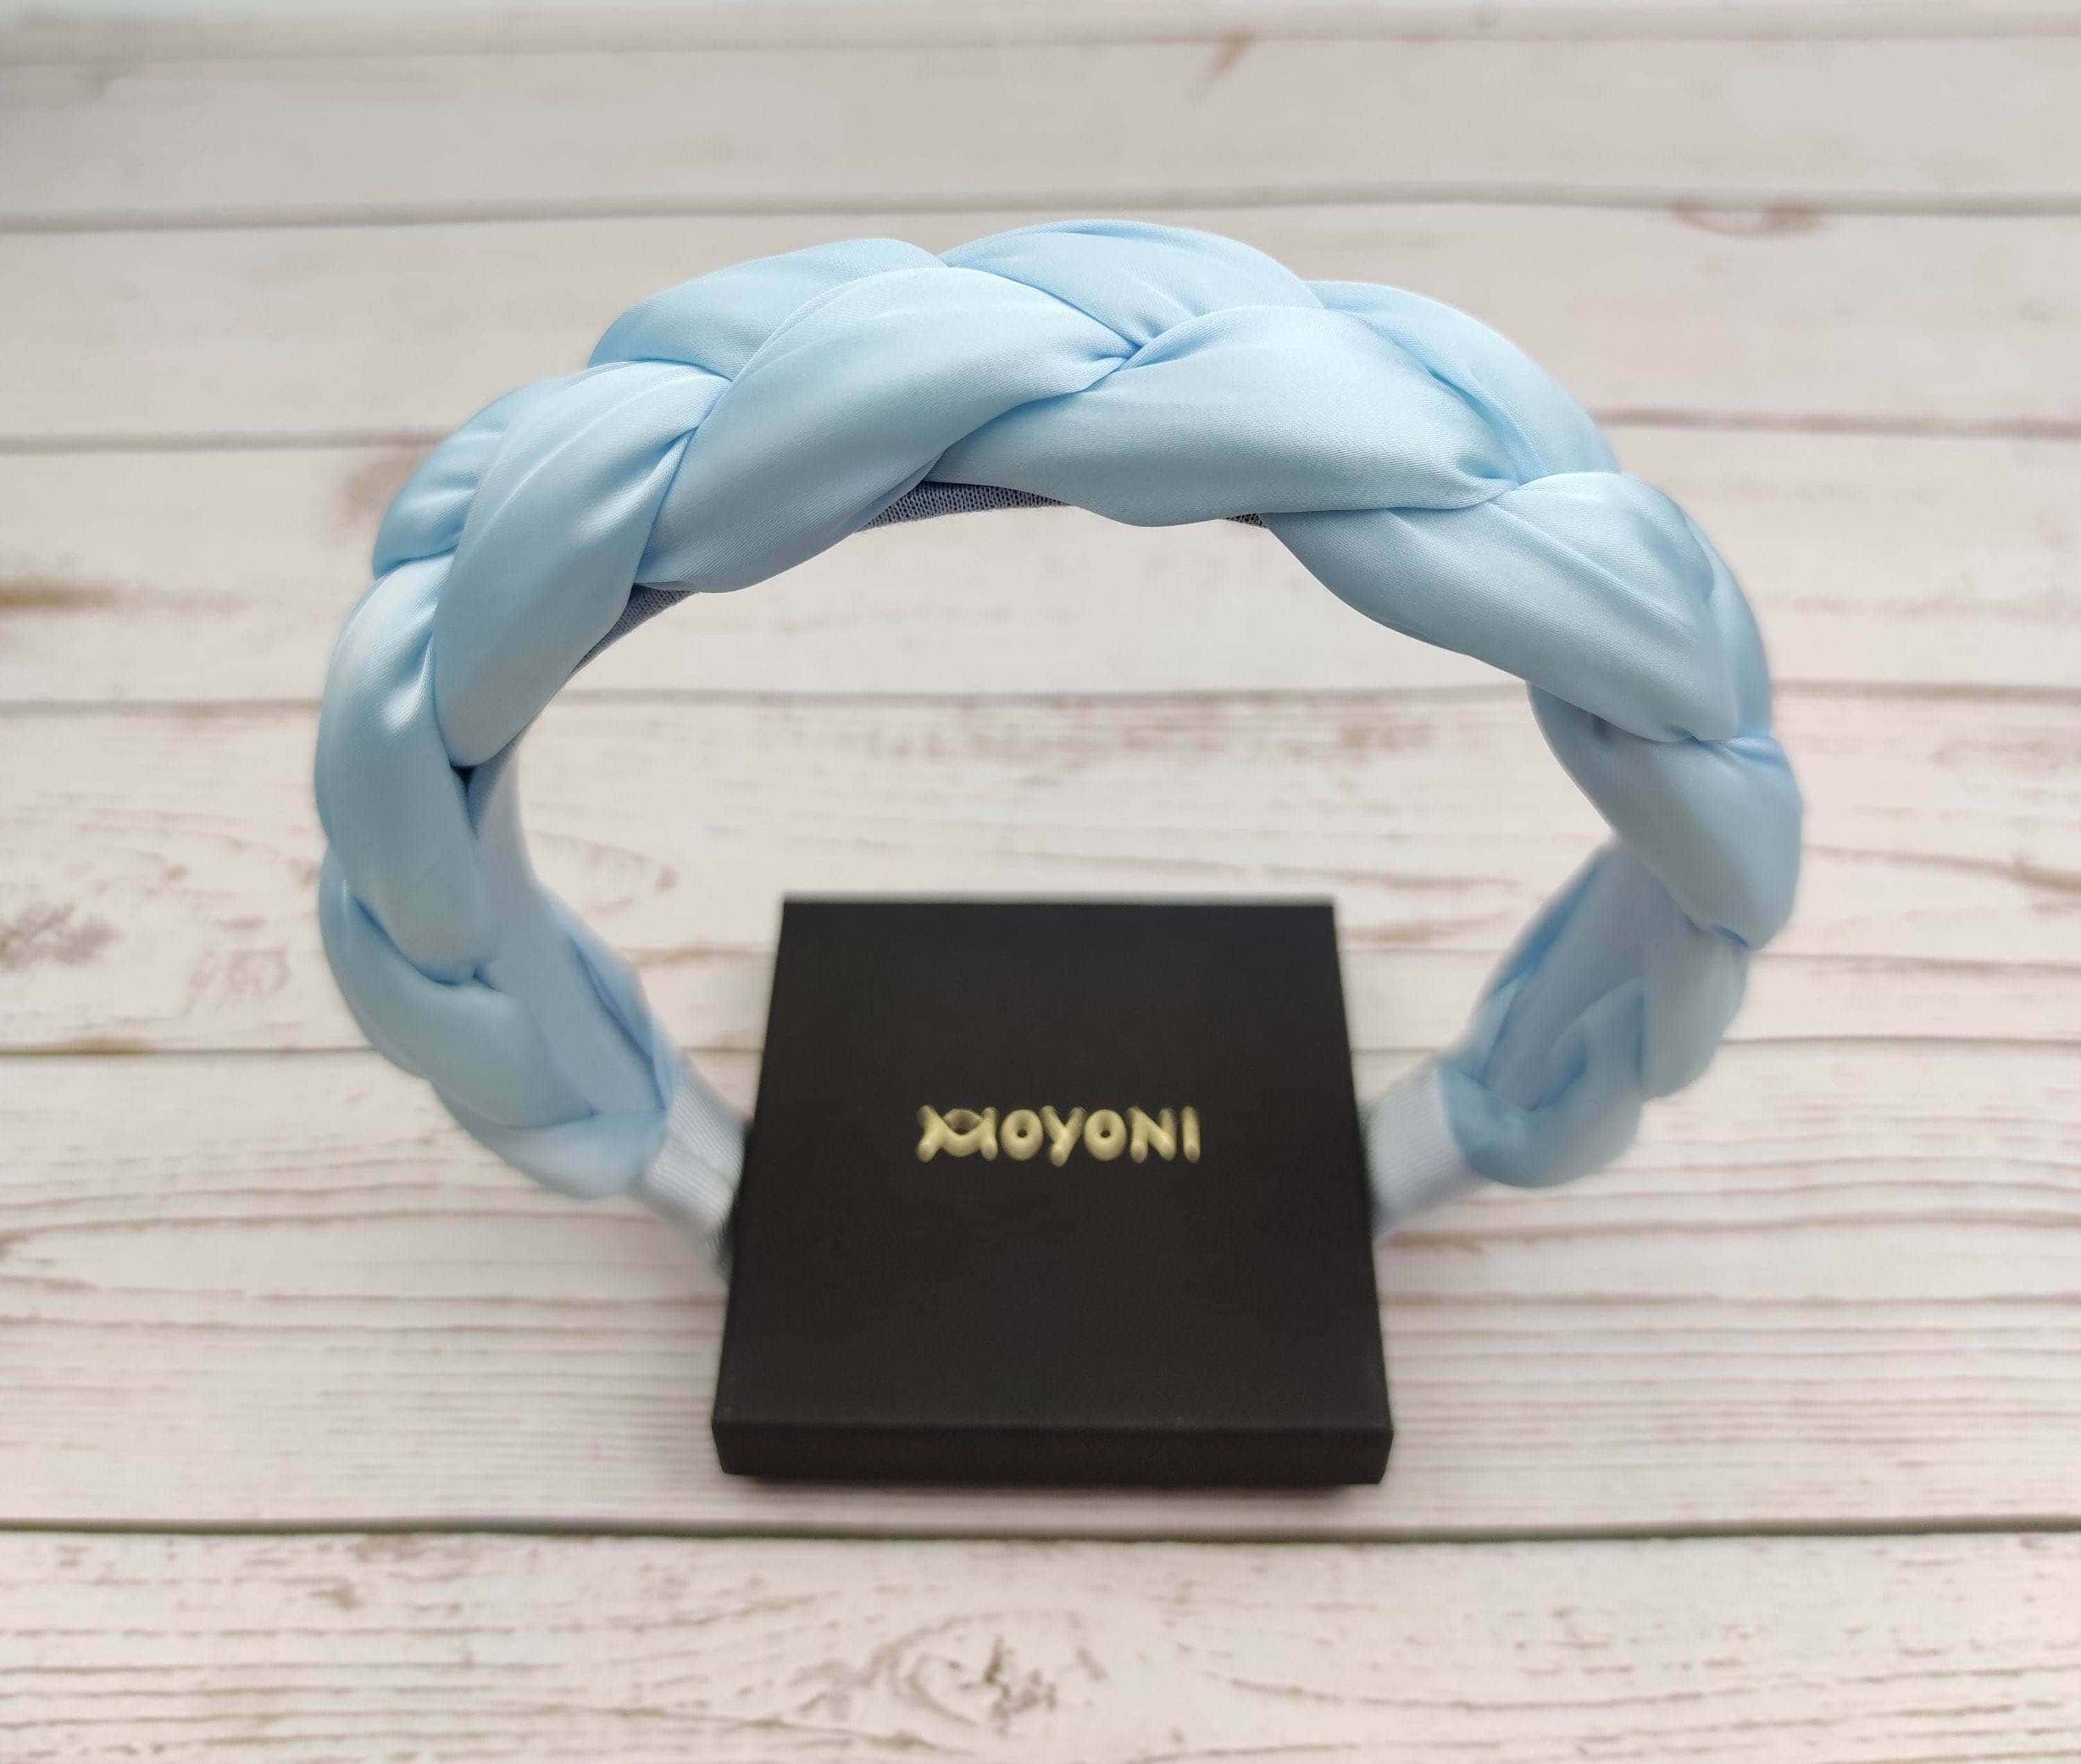 A must-have classic headband in a chic light blue hue.